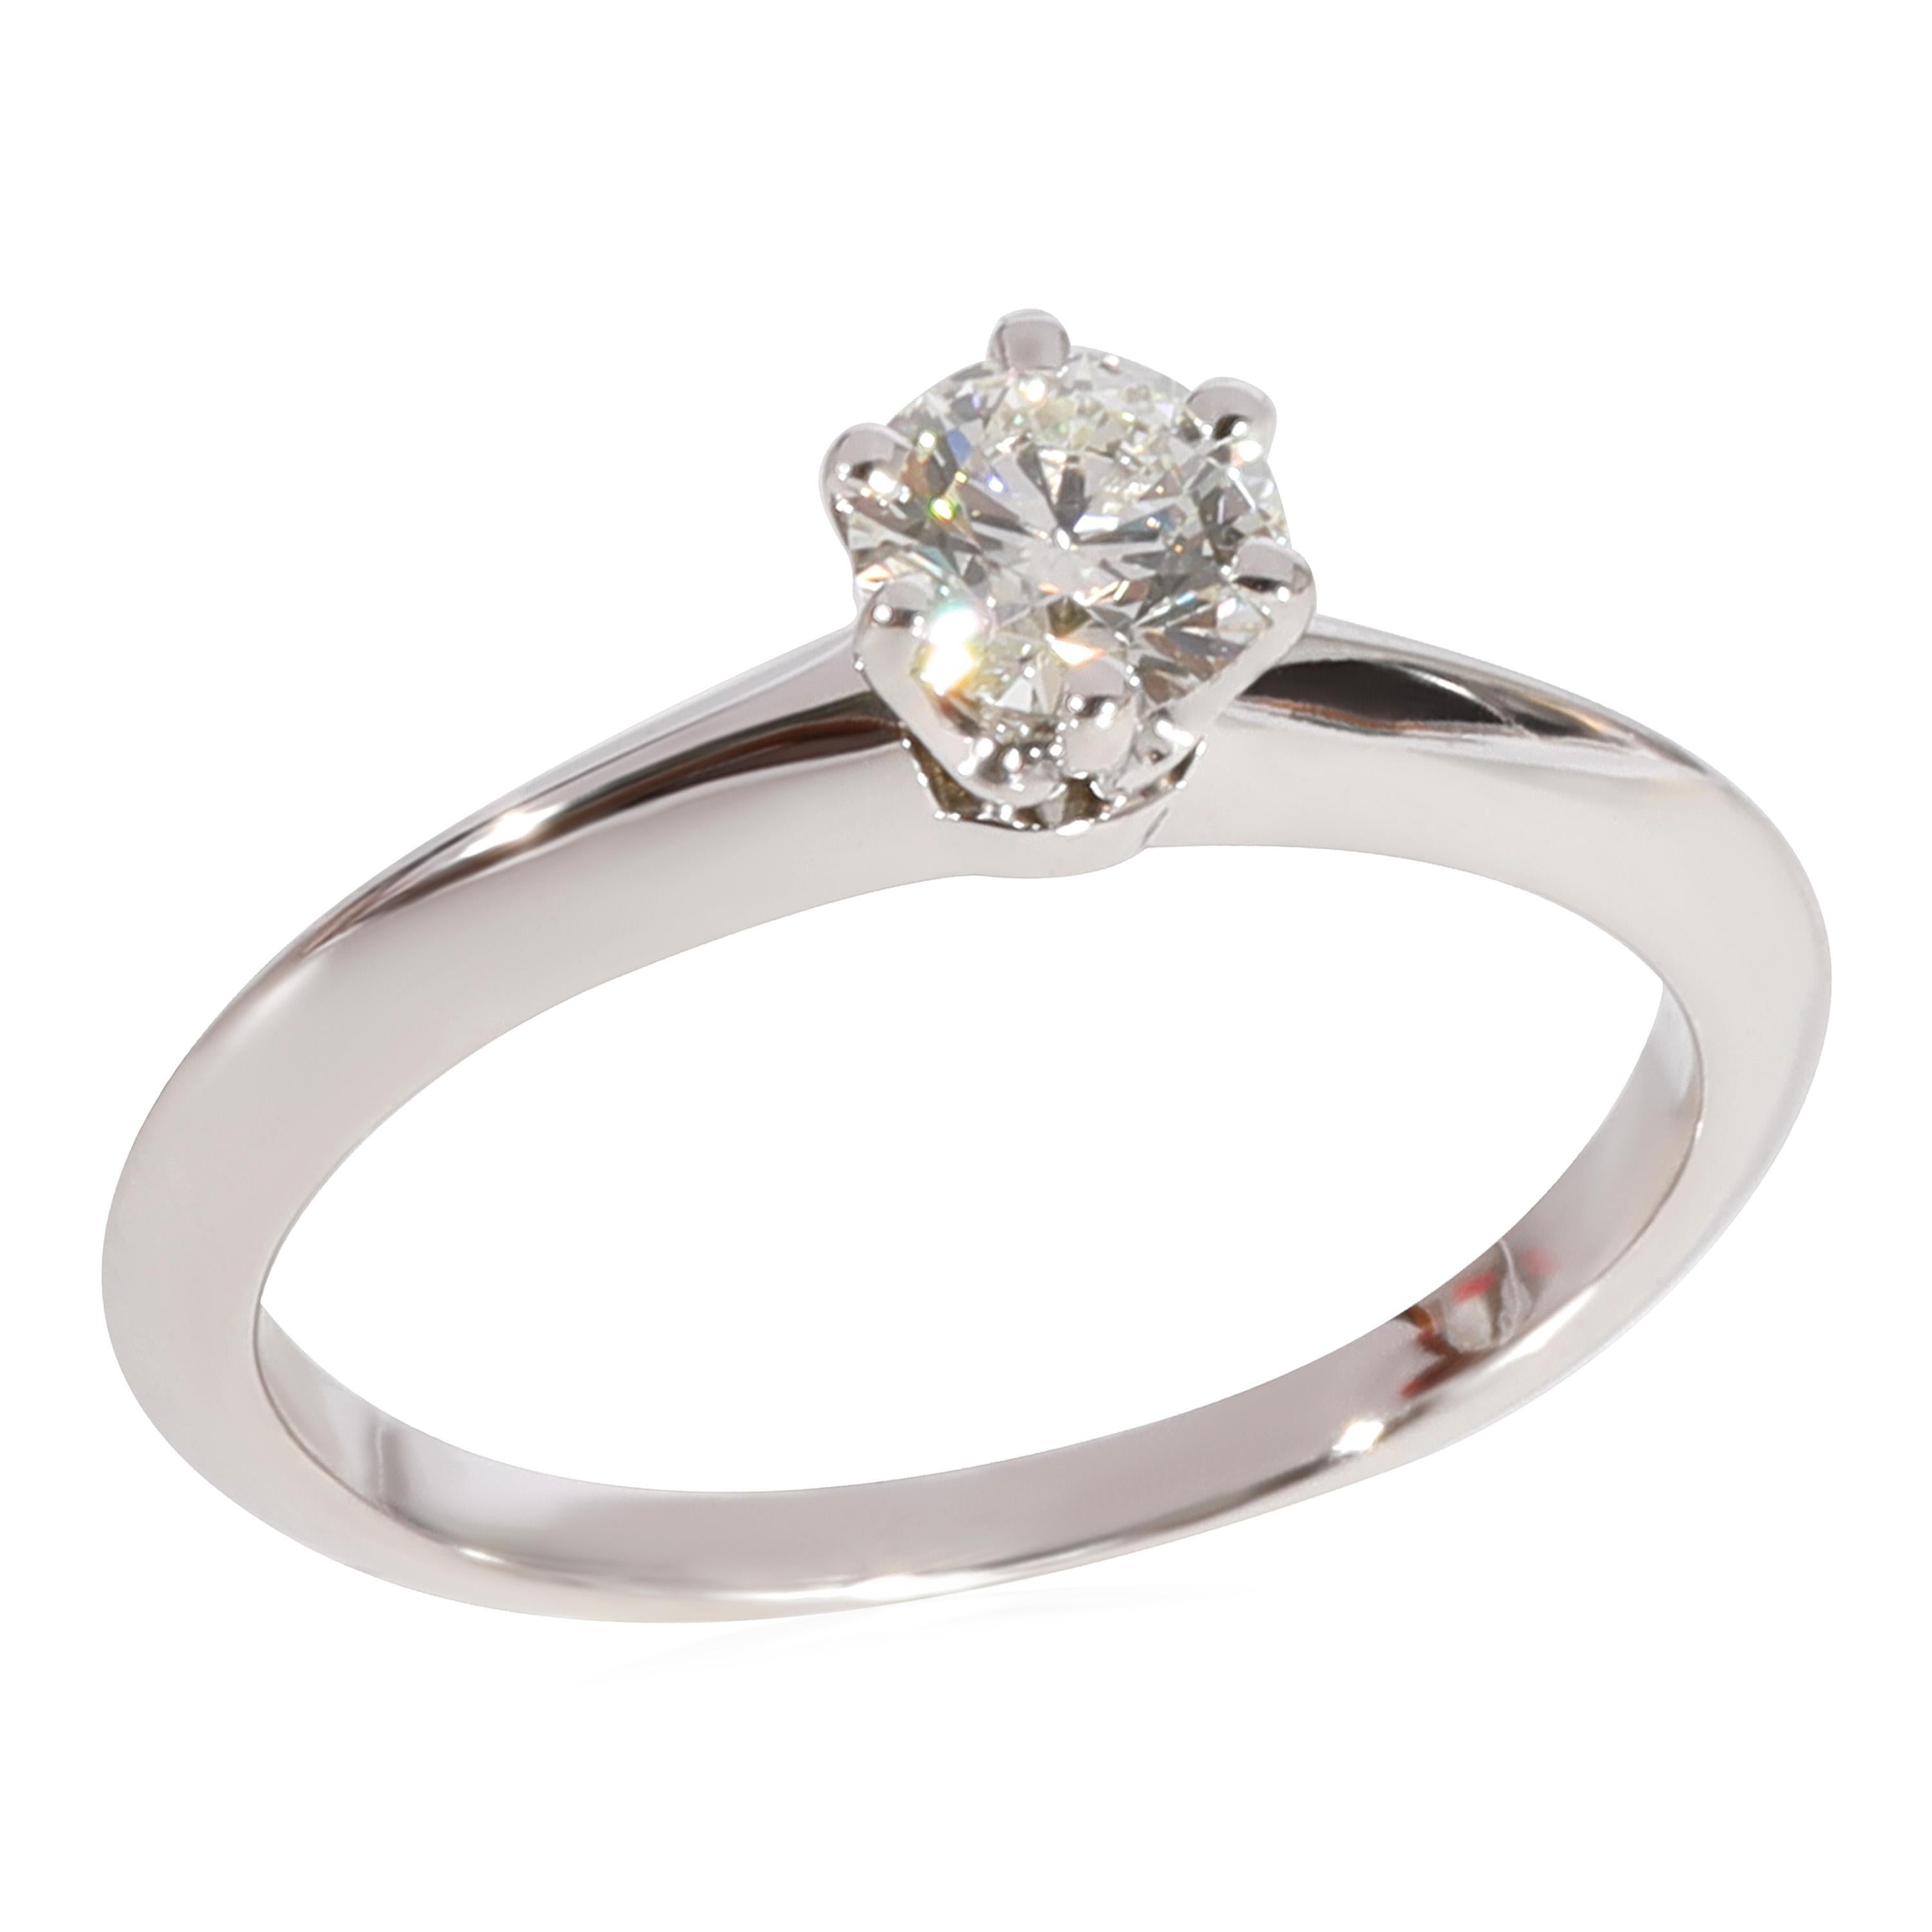 Tiffany & Co. Diamond Solitaire Ring in 950 Platinum I VVS1 0.31 CTW In Excellent Condition For Sale In New York, NY